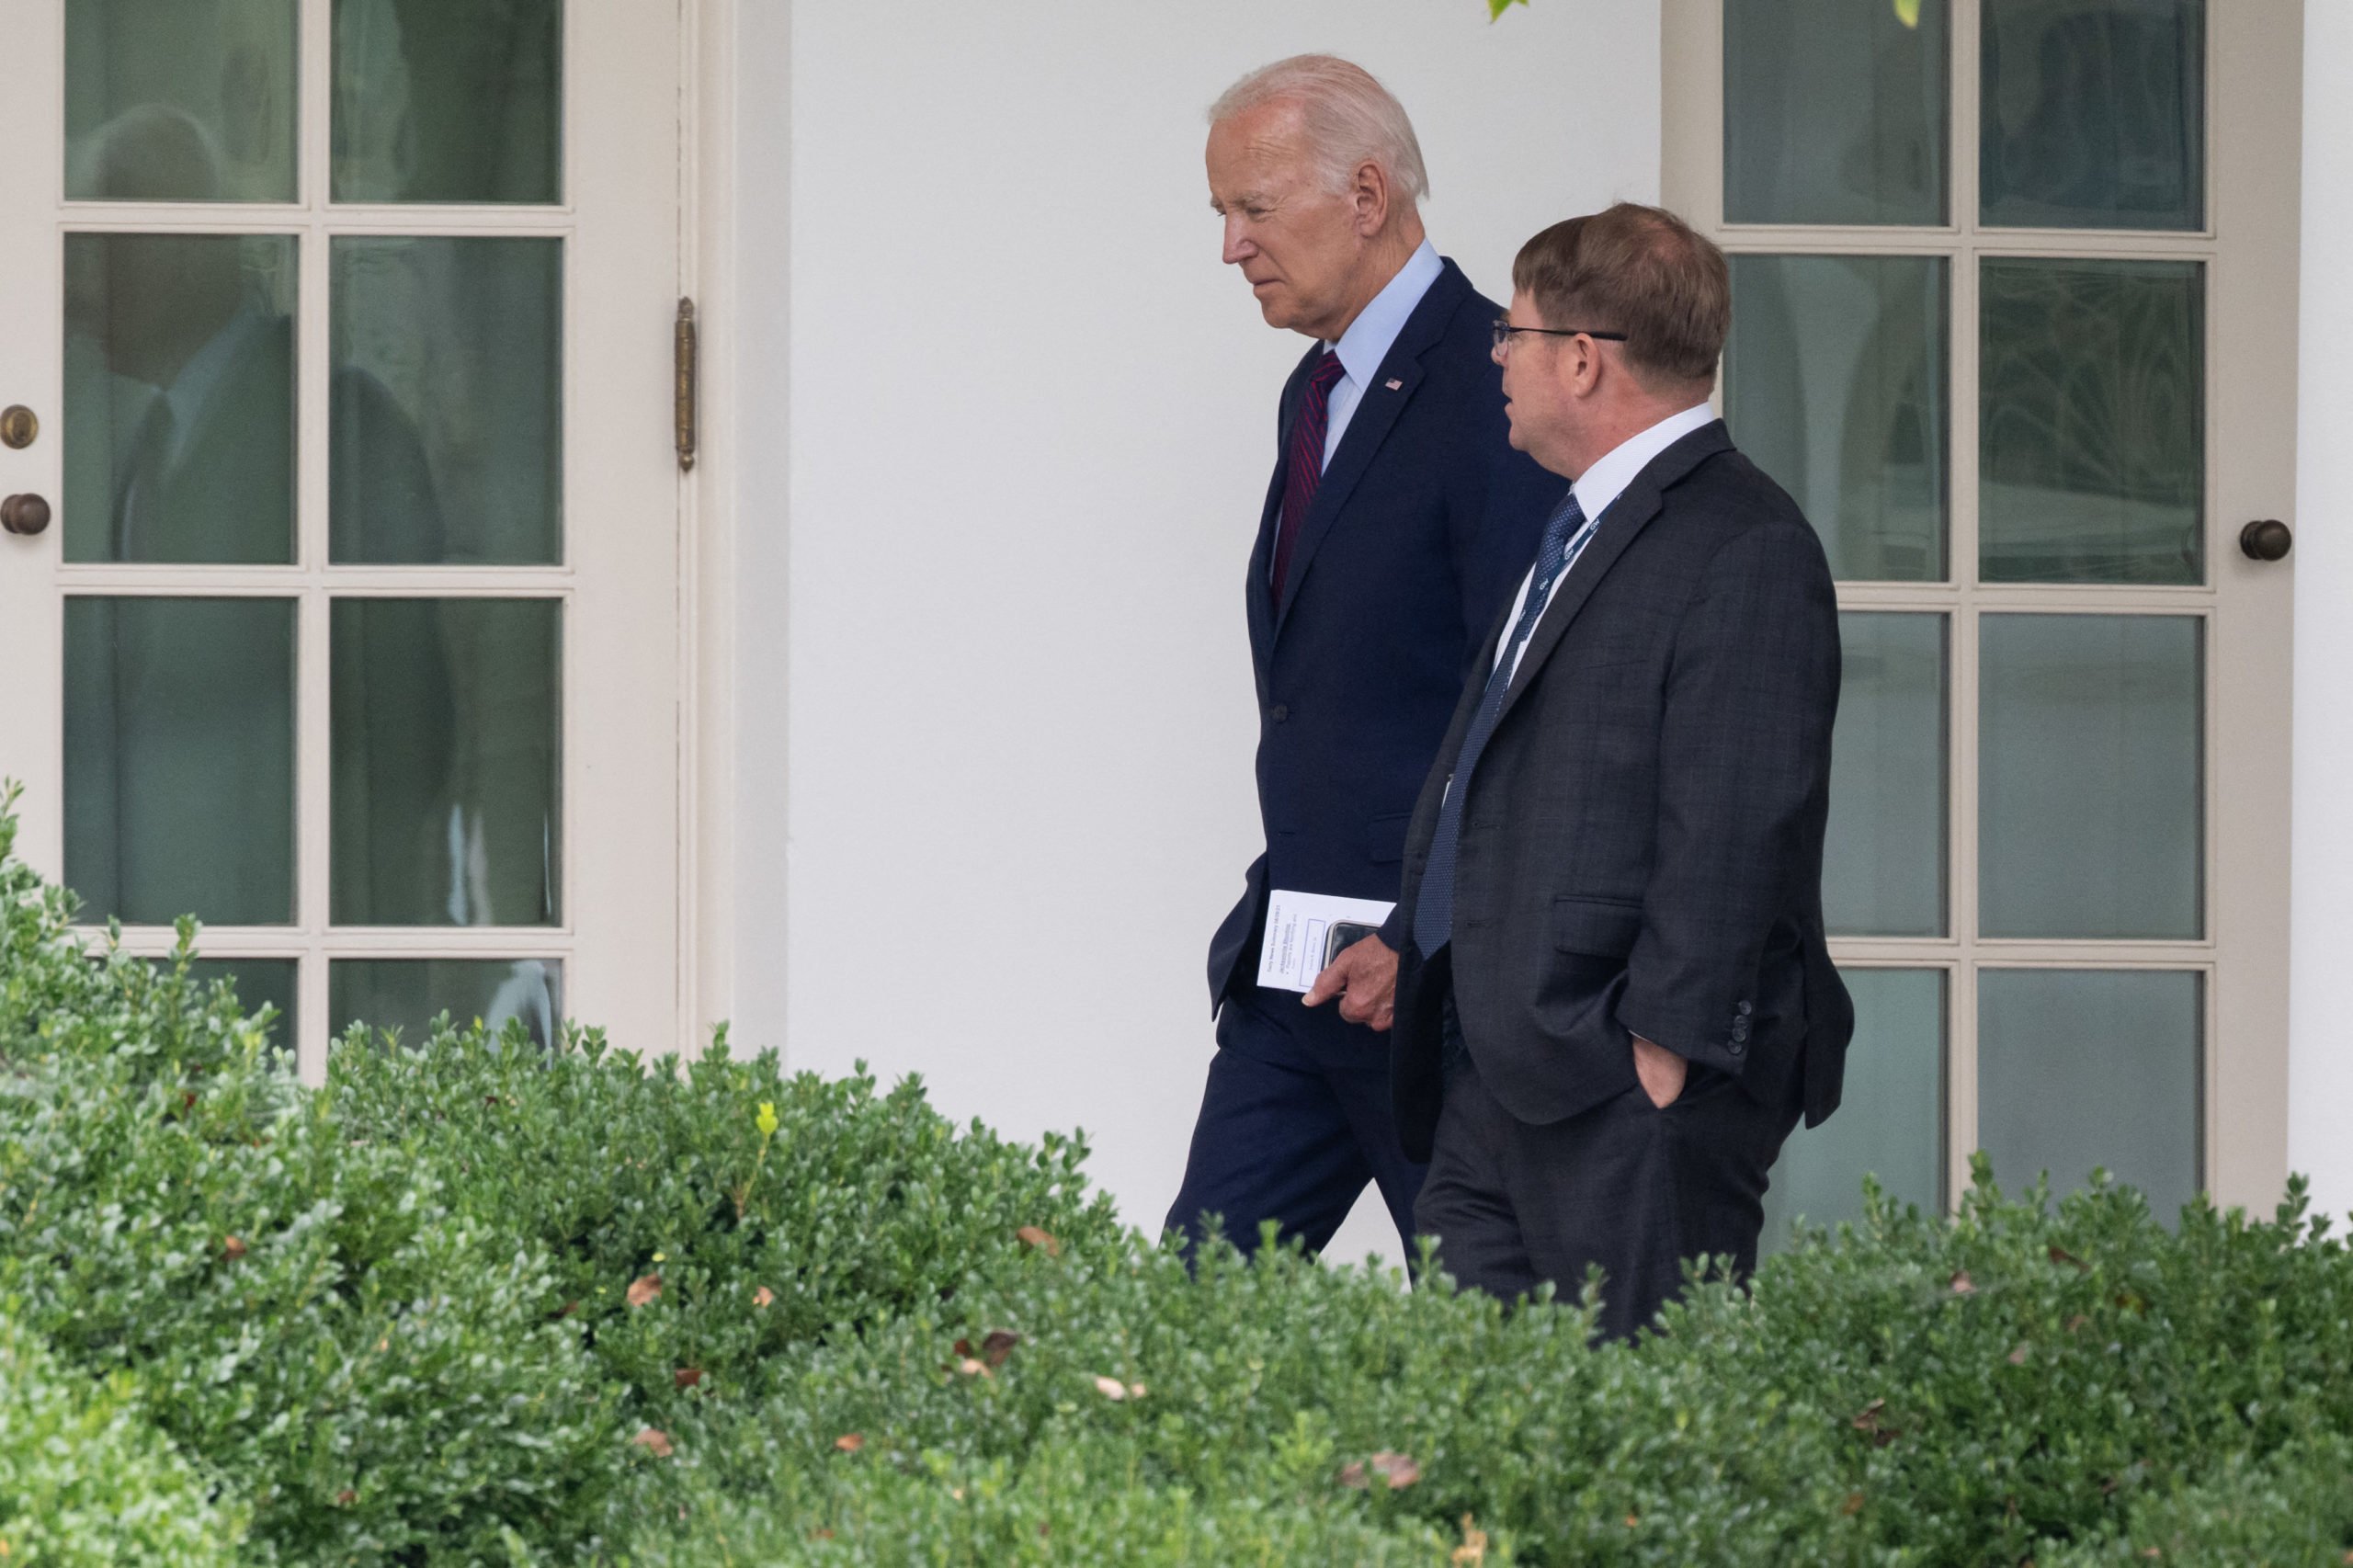 US President Joe Biden speaks with White House Physician Kevin O'Connor as he arrives back at the White House in Washington, DC, on August 28, 2023, following a visit to Eliot-Hine Middle School.(Photo by SAUL LOEB/AFP via Getty Images)